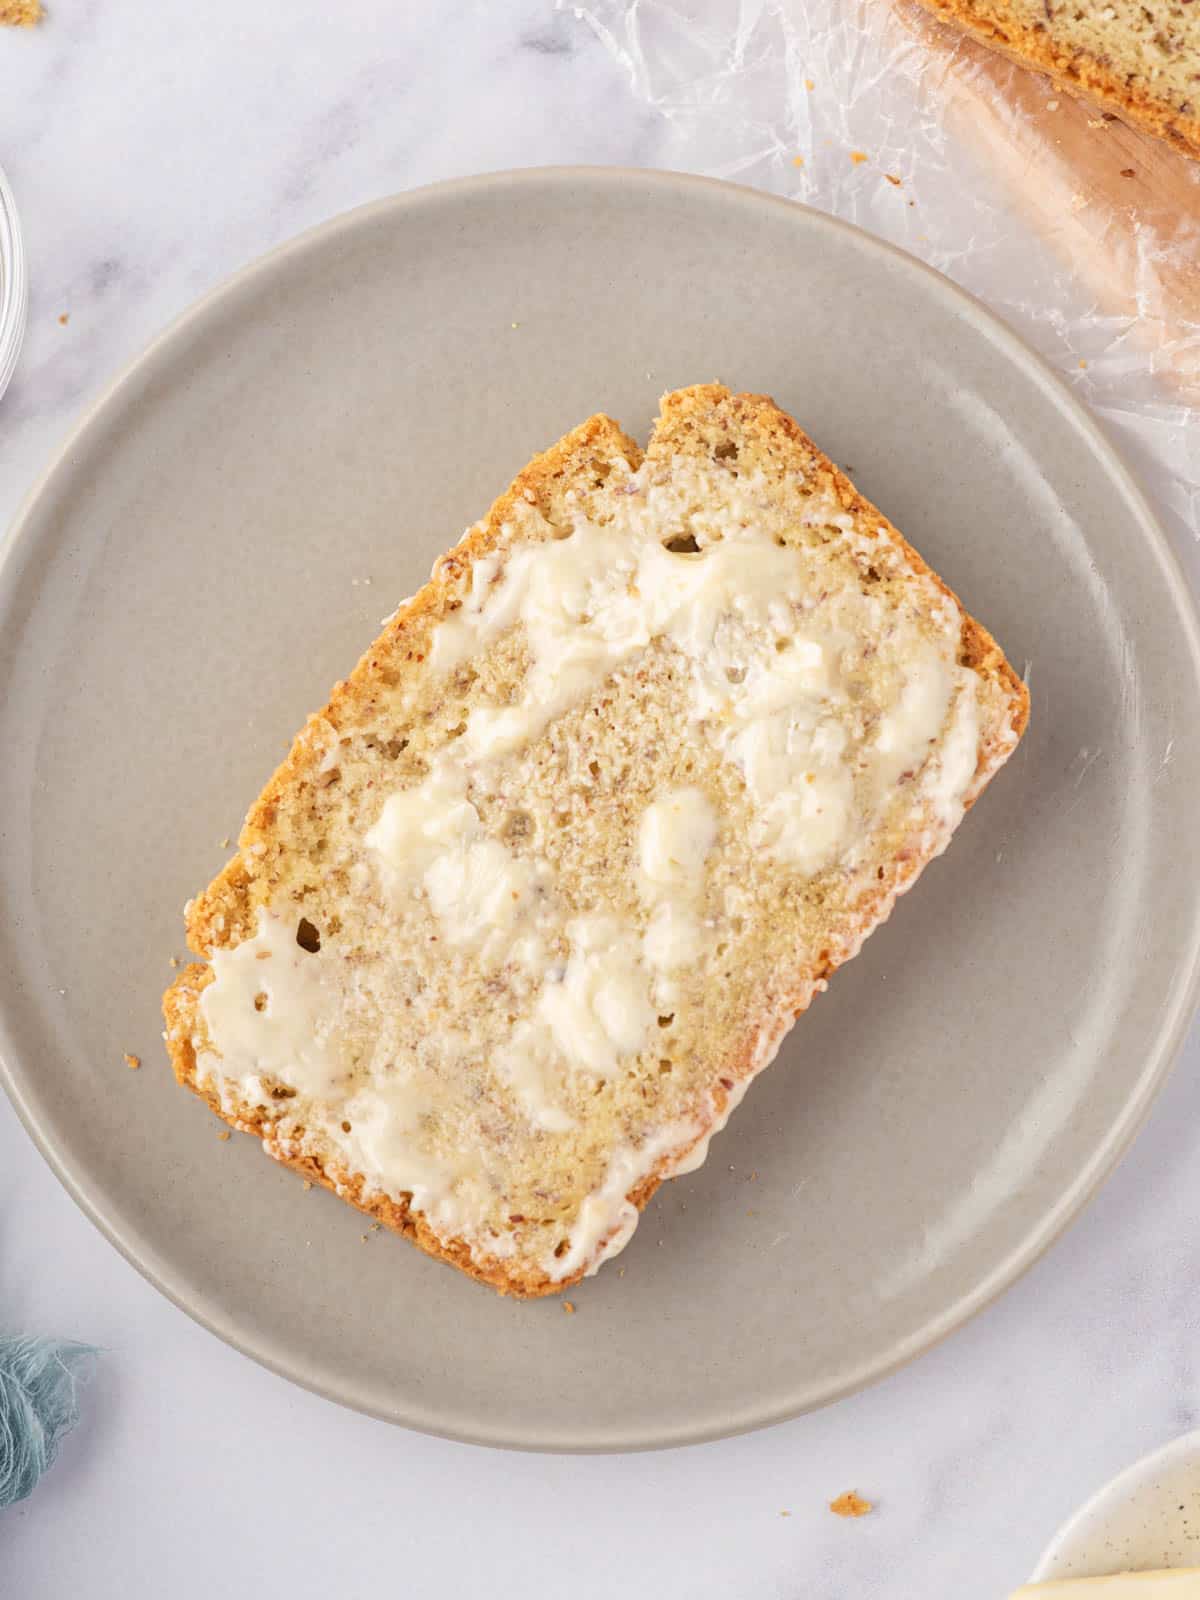 A slice of gluten free keto bread topped with melting butter sits on a grey plate.